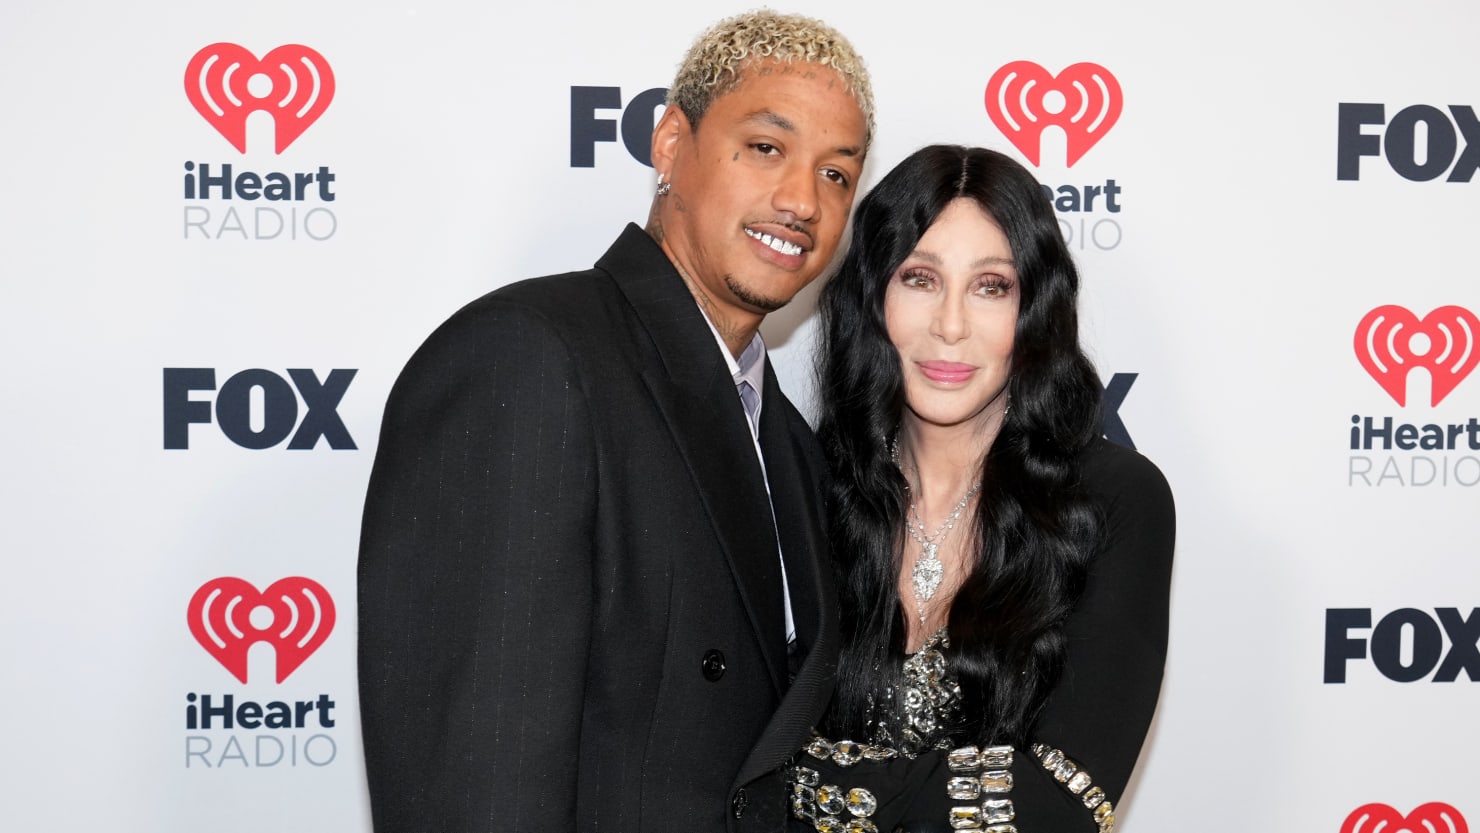 Cher Dates Younger Men Because Guys of Her Age Are ‘All Dead